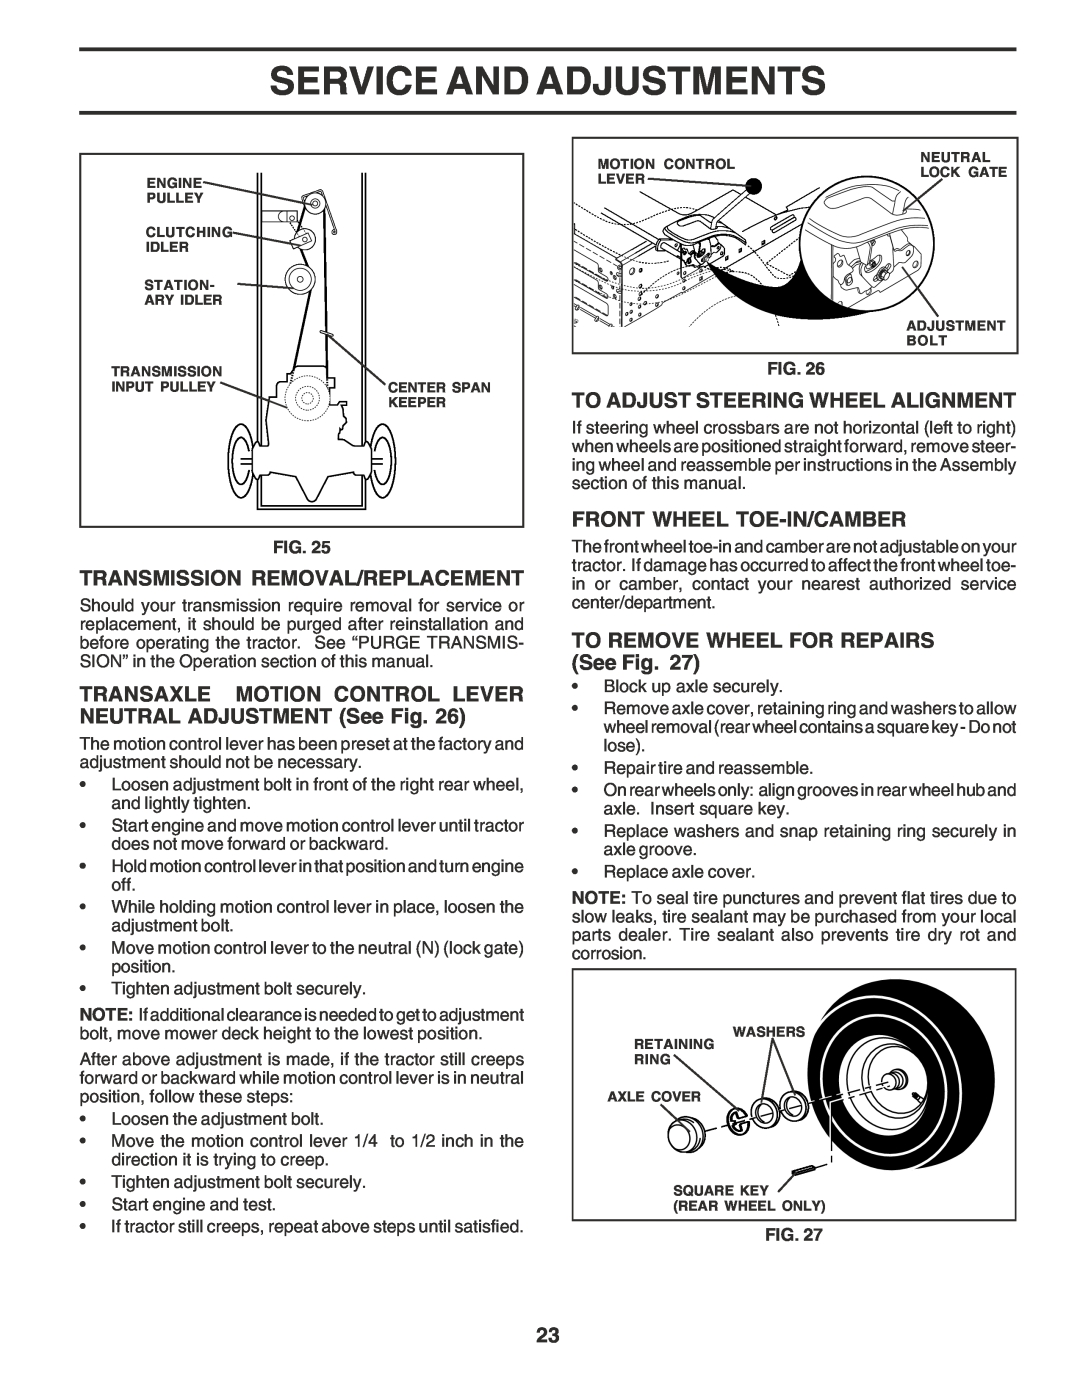 Poulan PPR20H42STC owner manual Transmission Removal/Replacement, TRANSAXLE MOTION CONTROL LEVER NEUTRAL ADJUSTMENT See Fig 